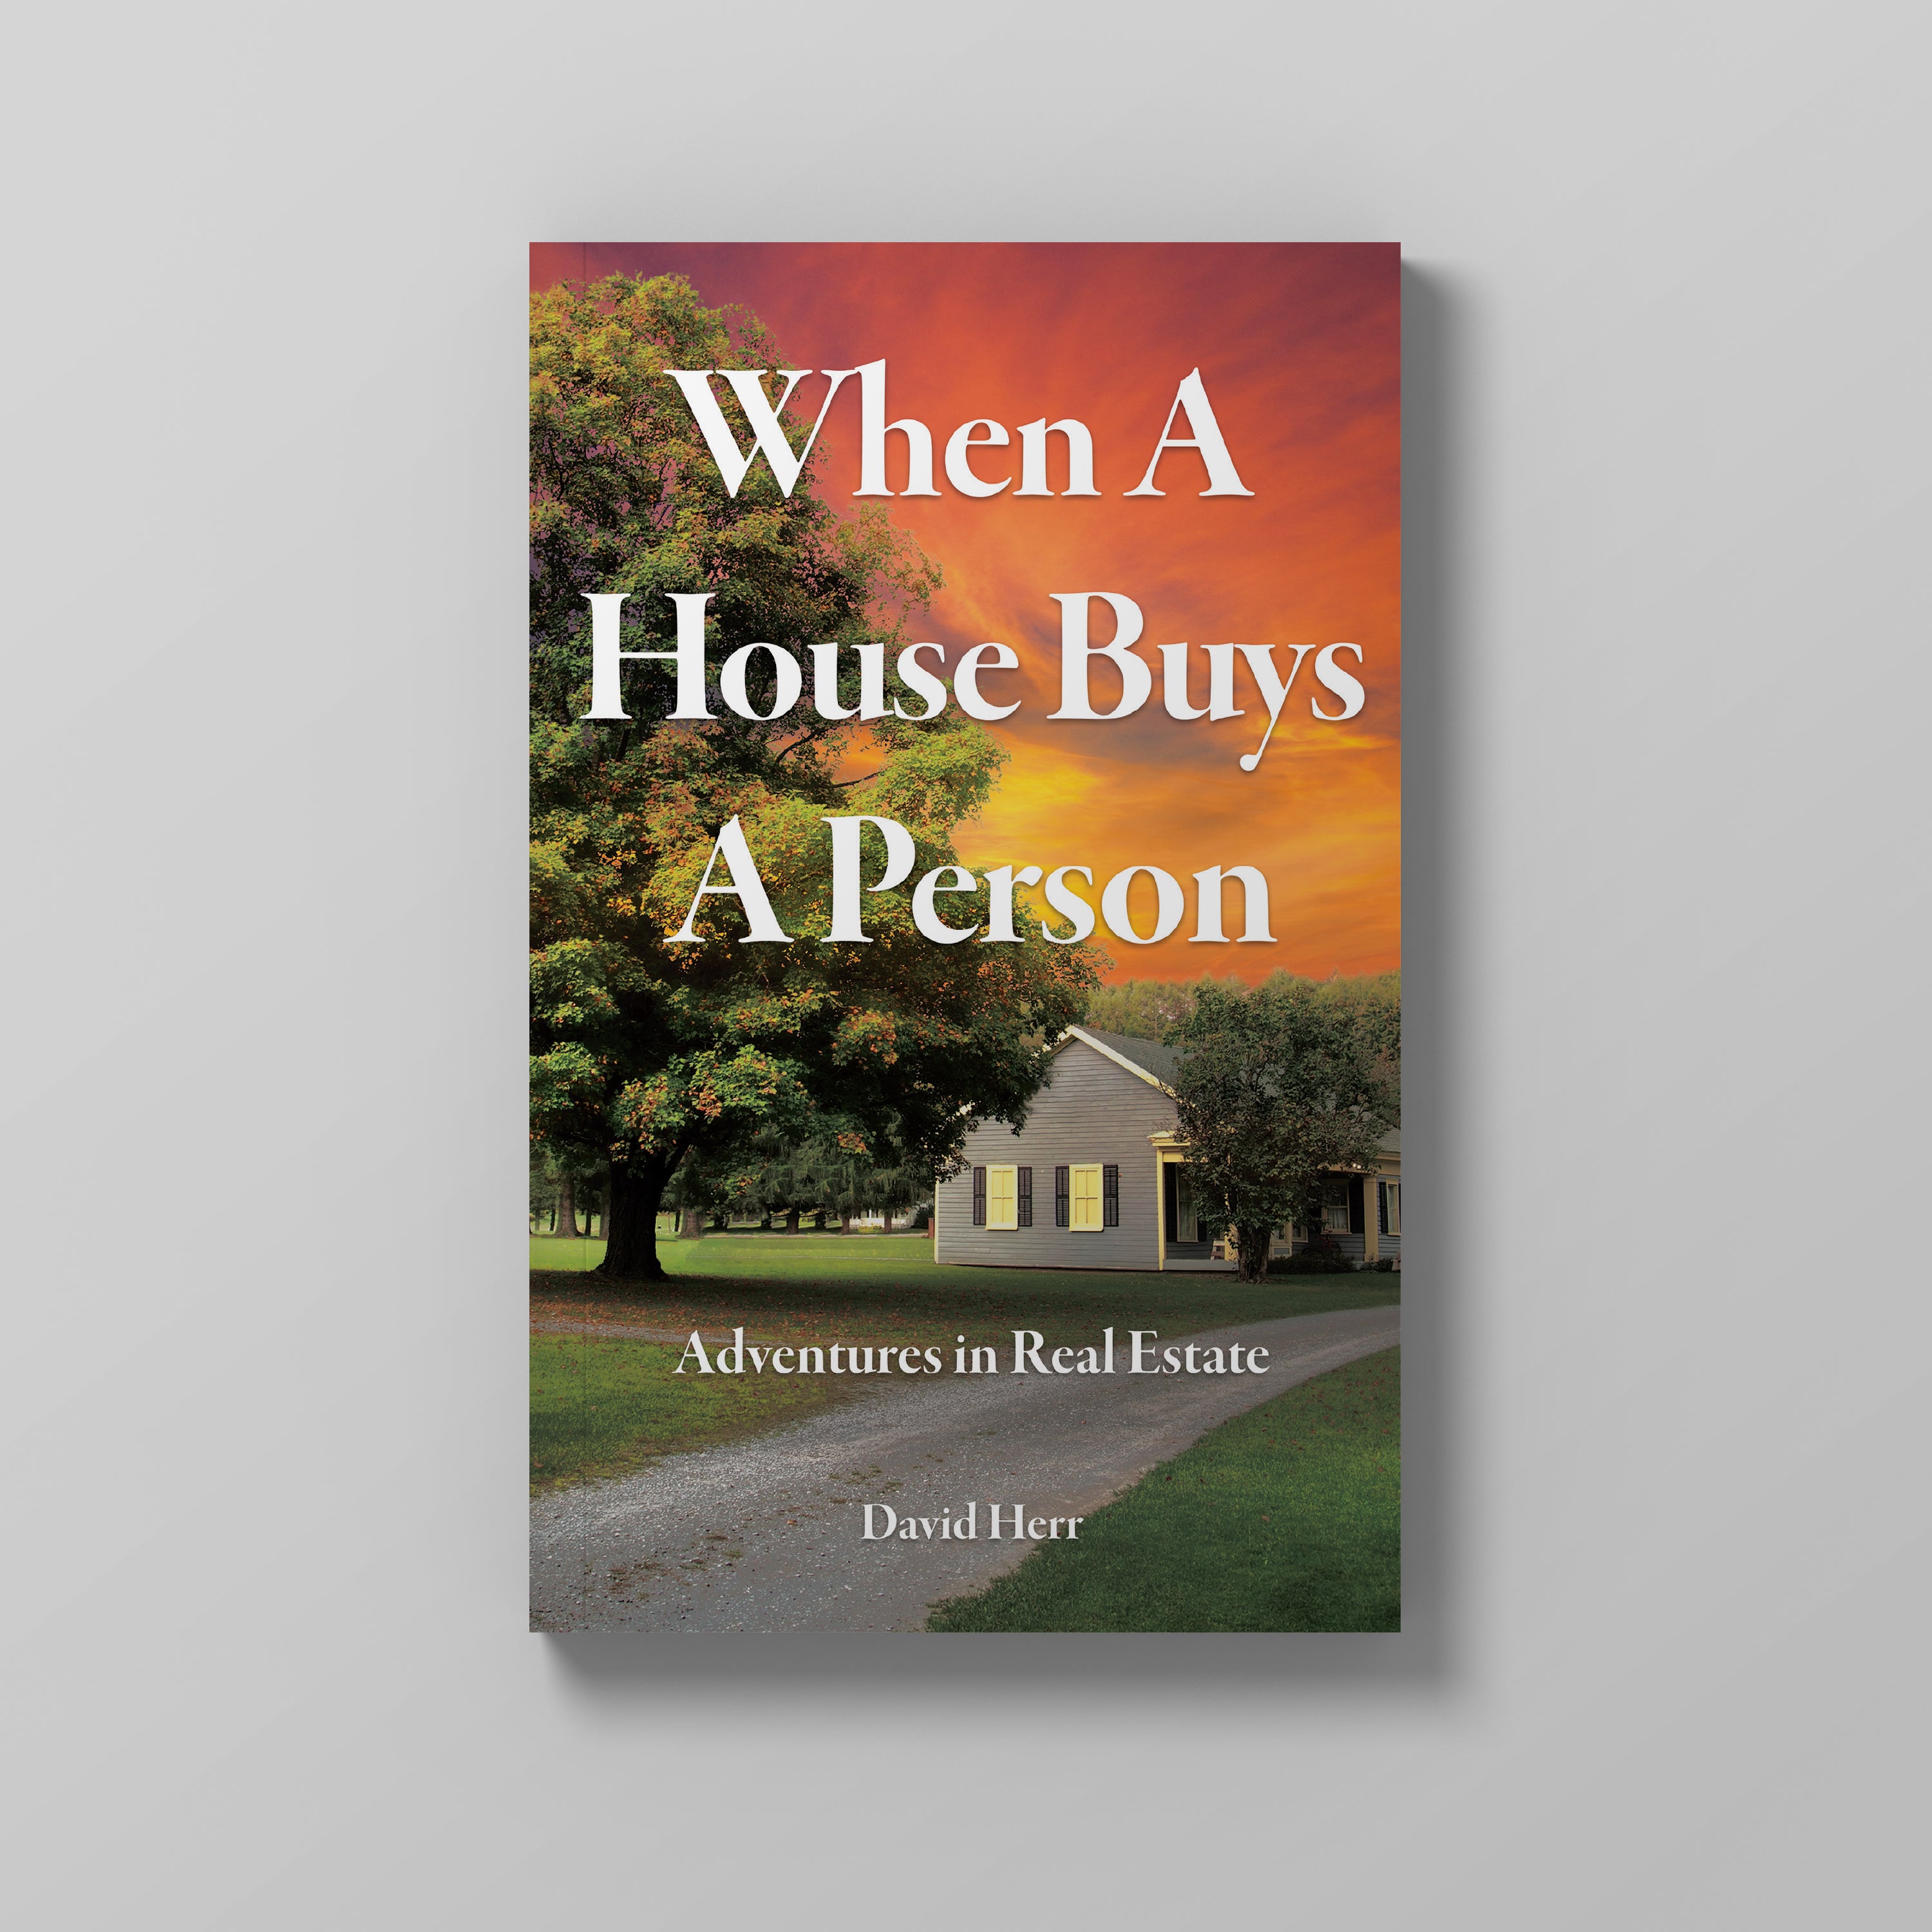 When a House Buys a Person: Adventures In Real Estate